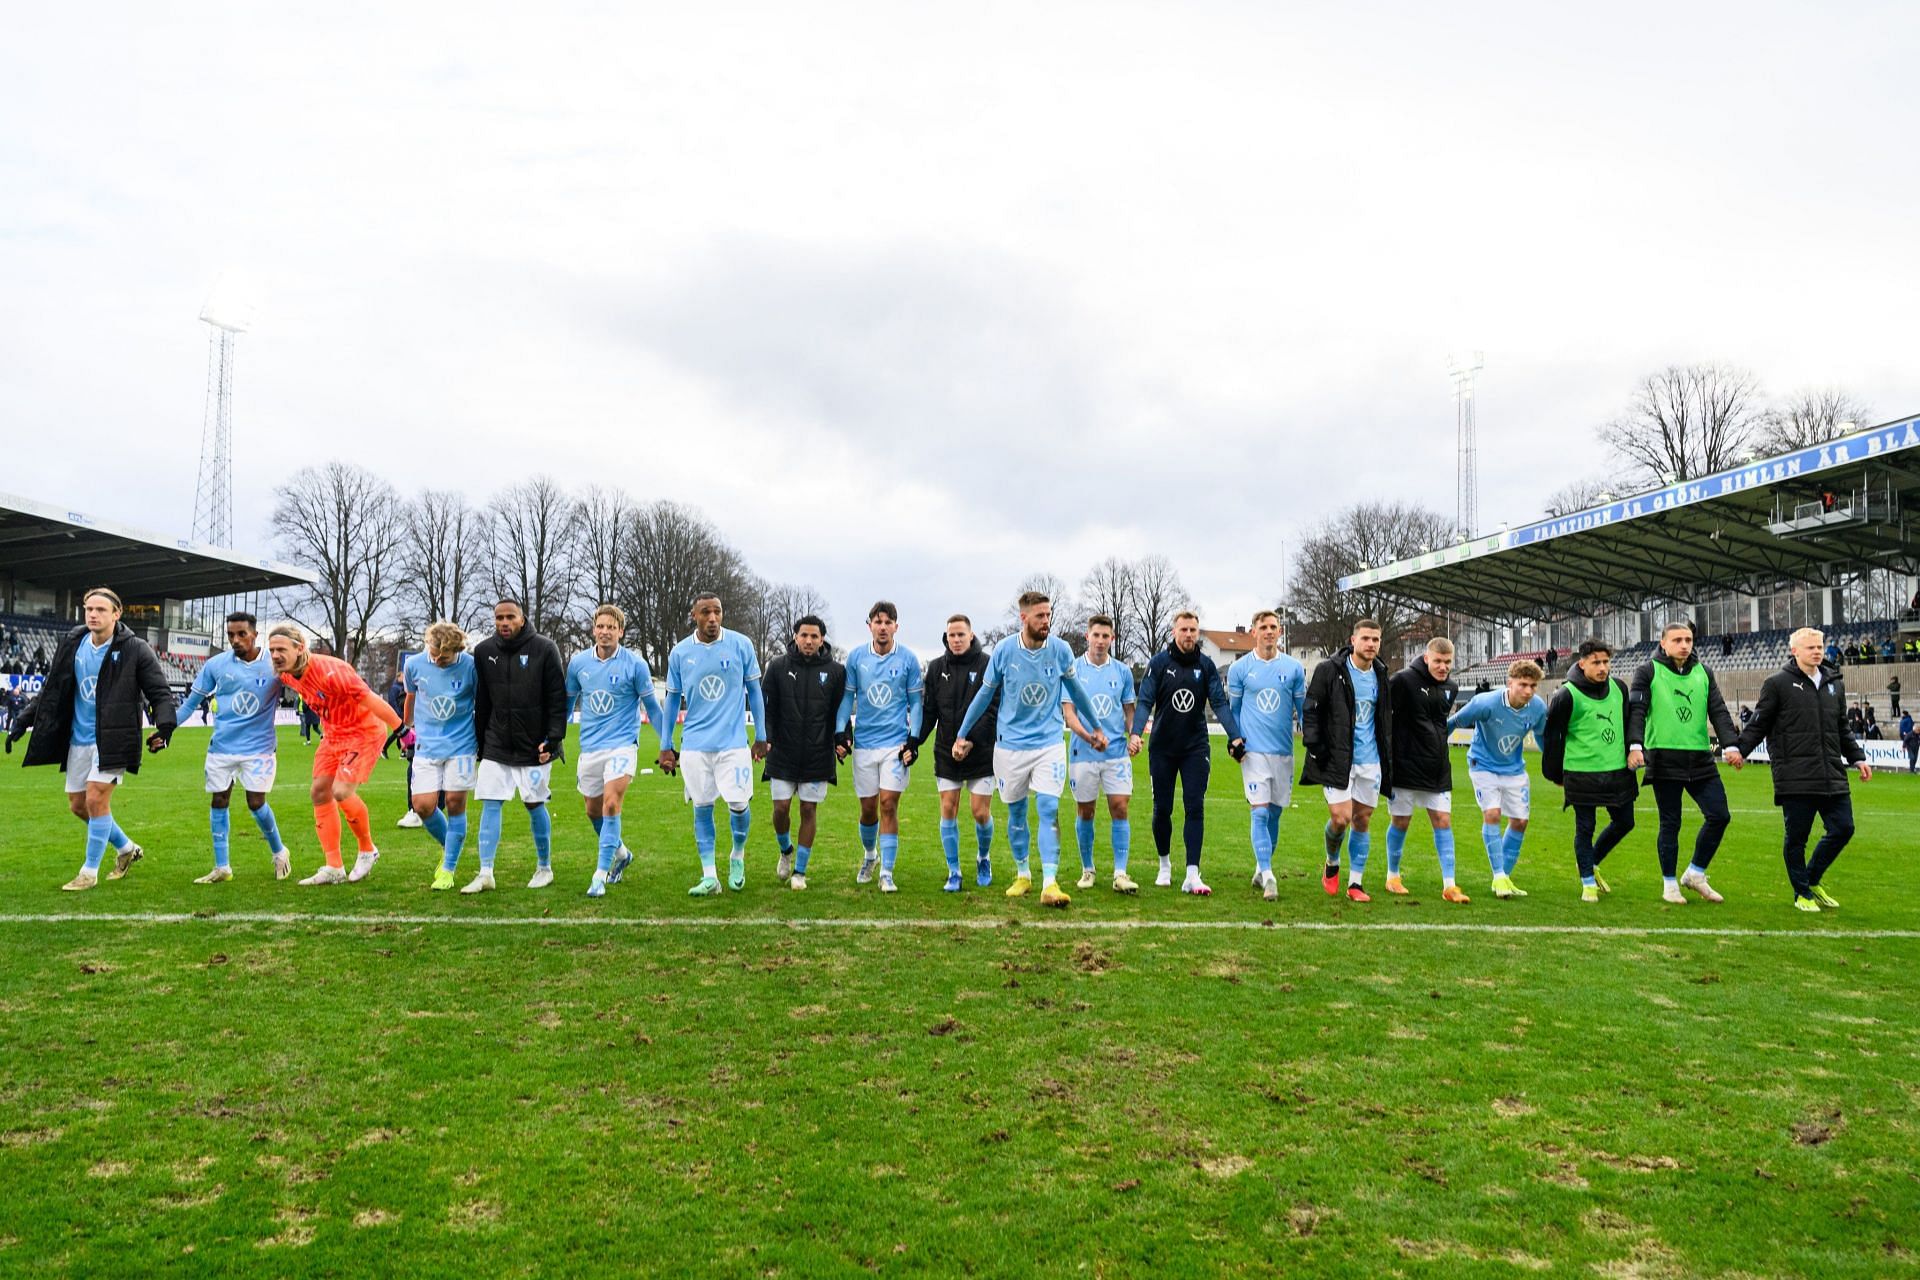 Malmo face Norrkoping on Saturday 